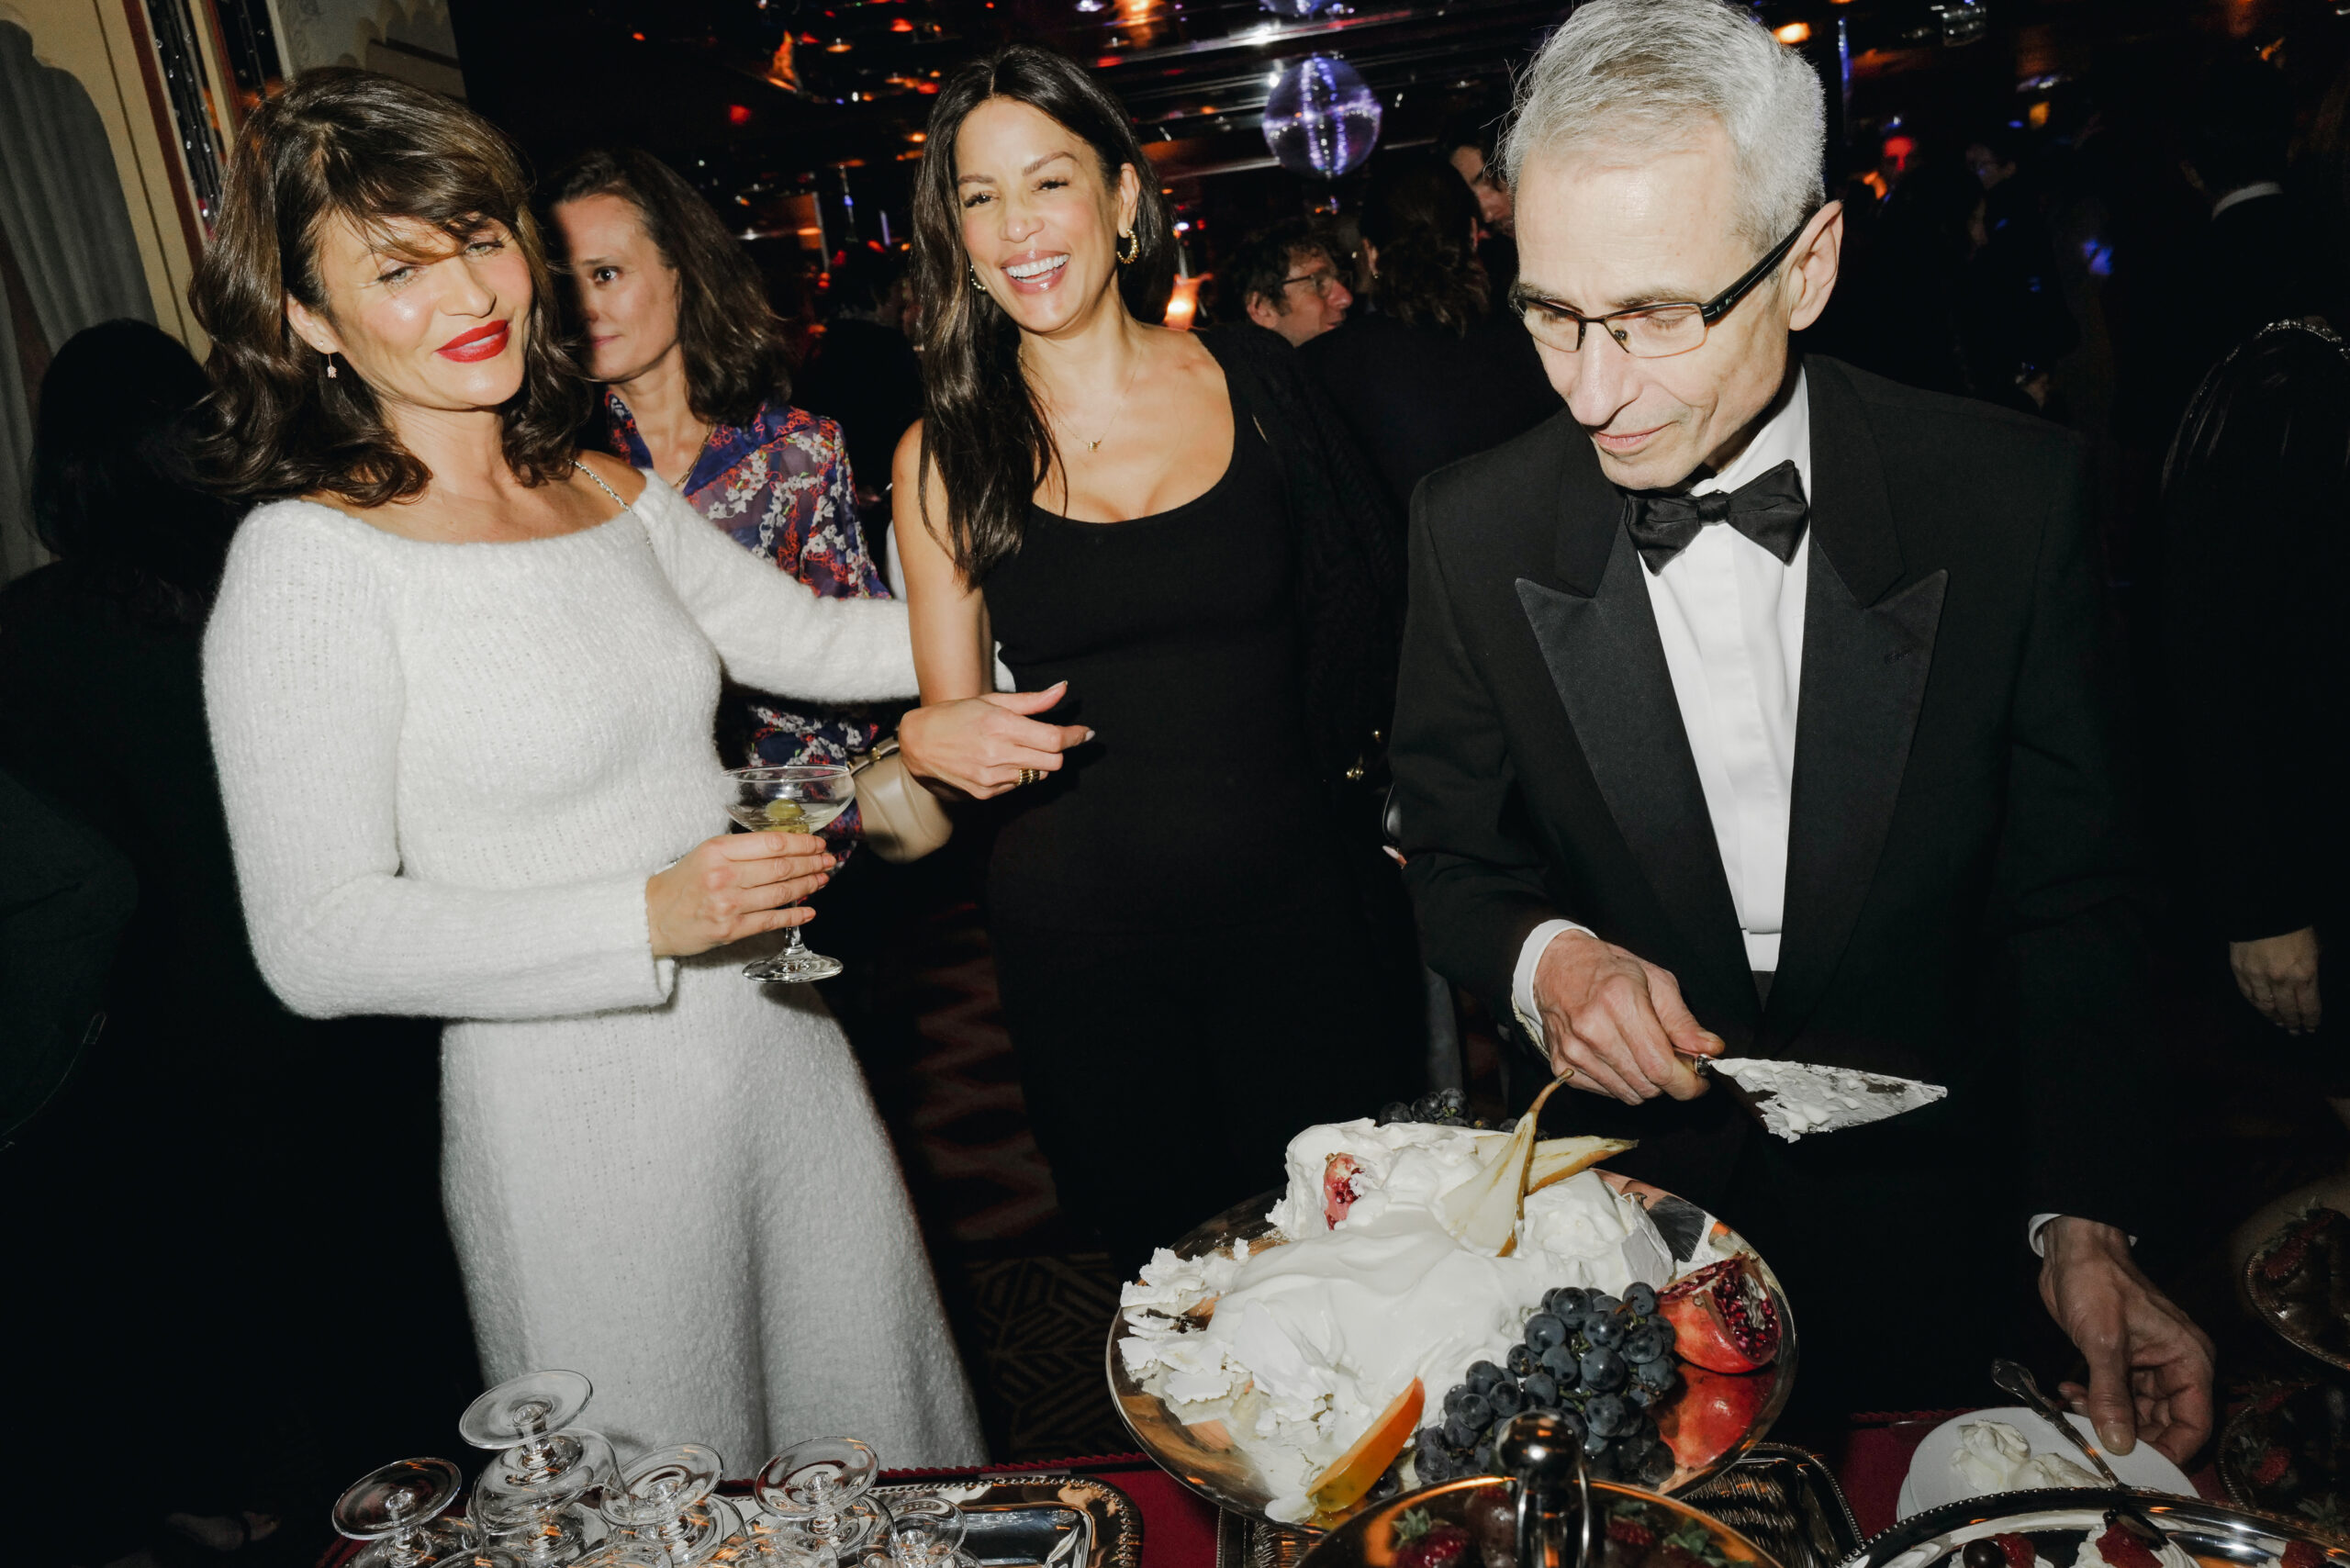 Fashion Meets Sustainability: NET-A-PORTER and Gabriela Hearst’s Exclusive Soiree